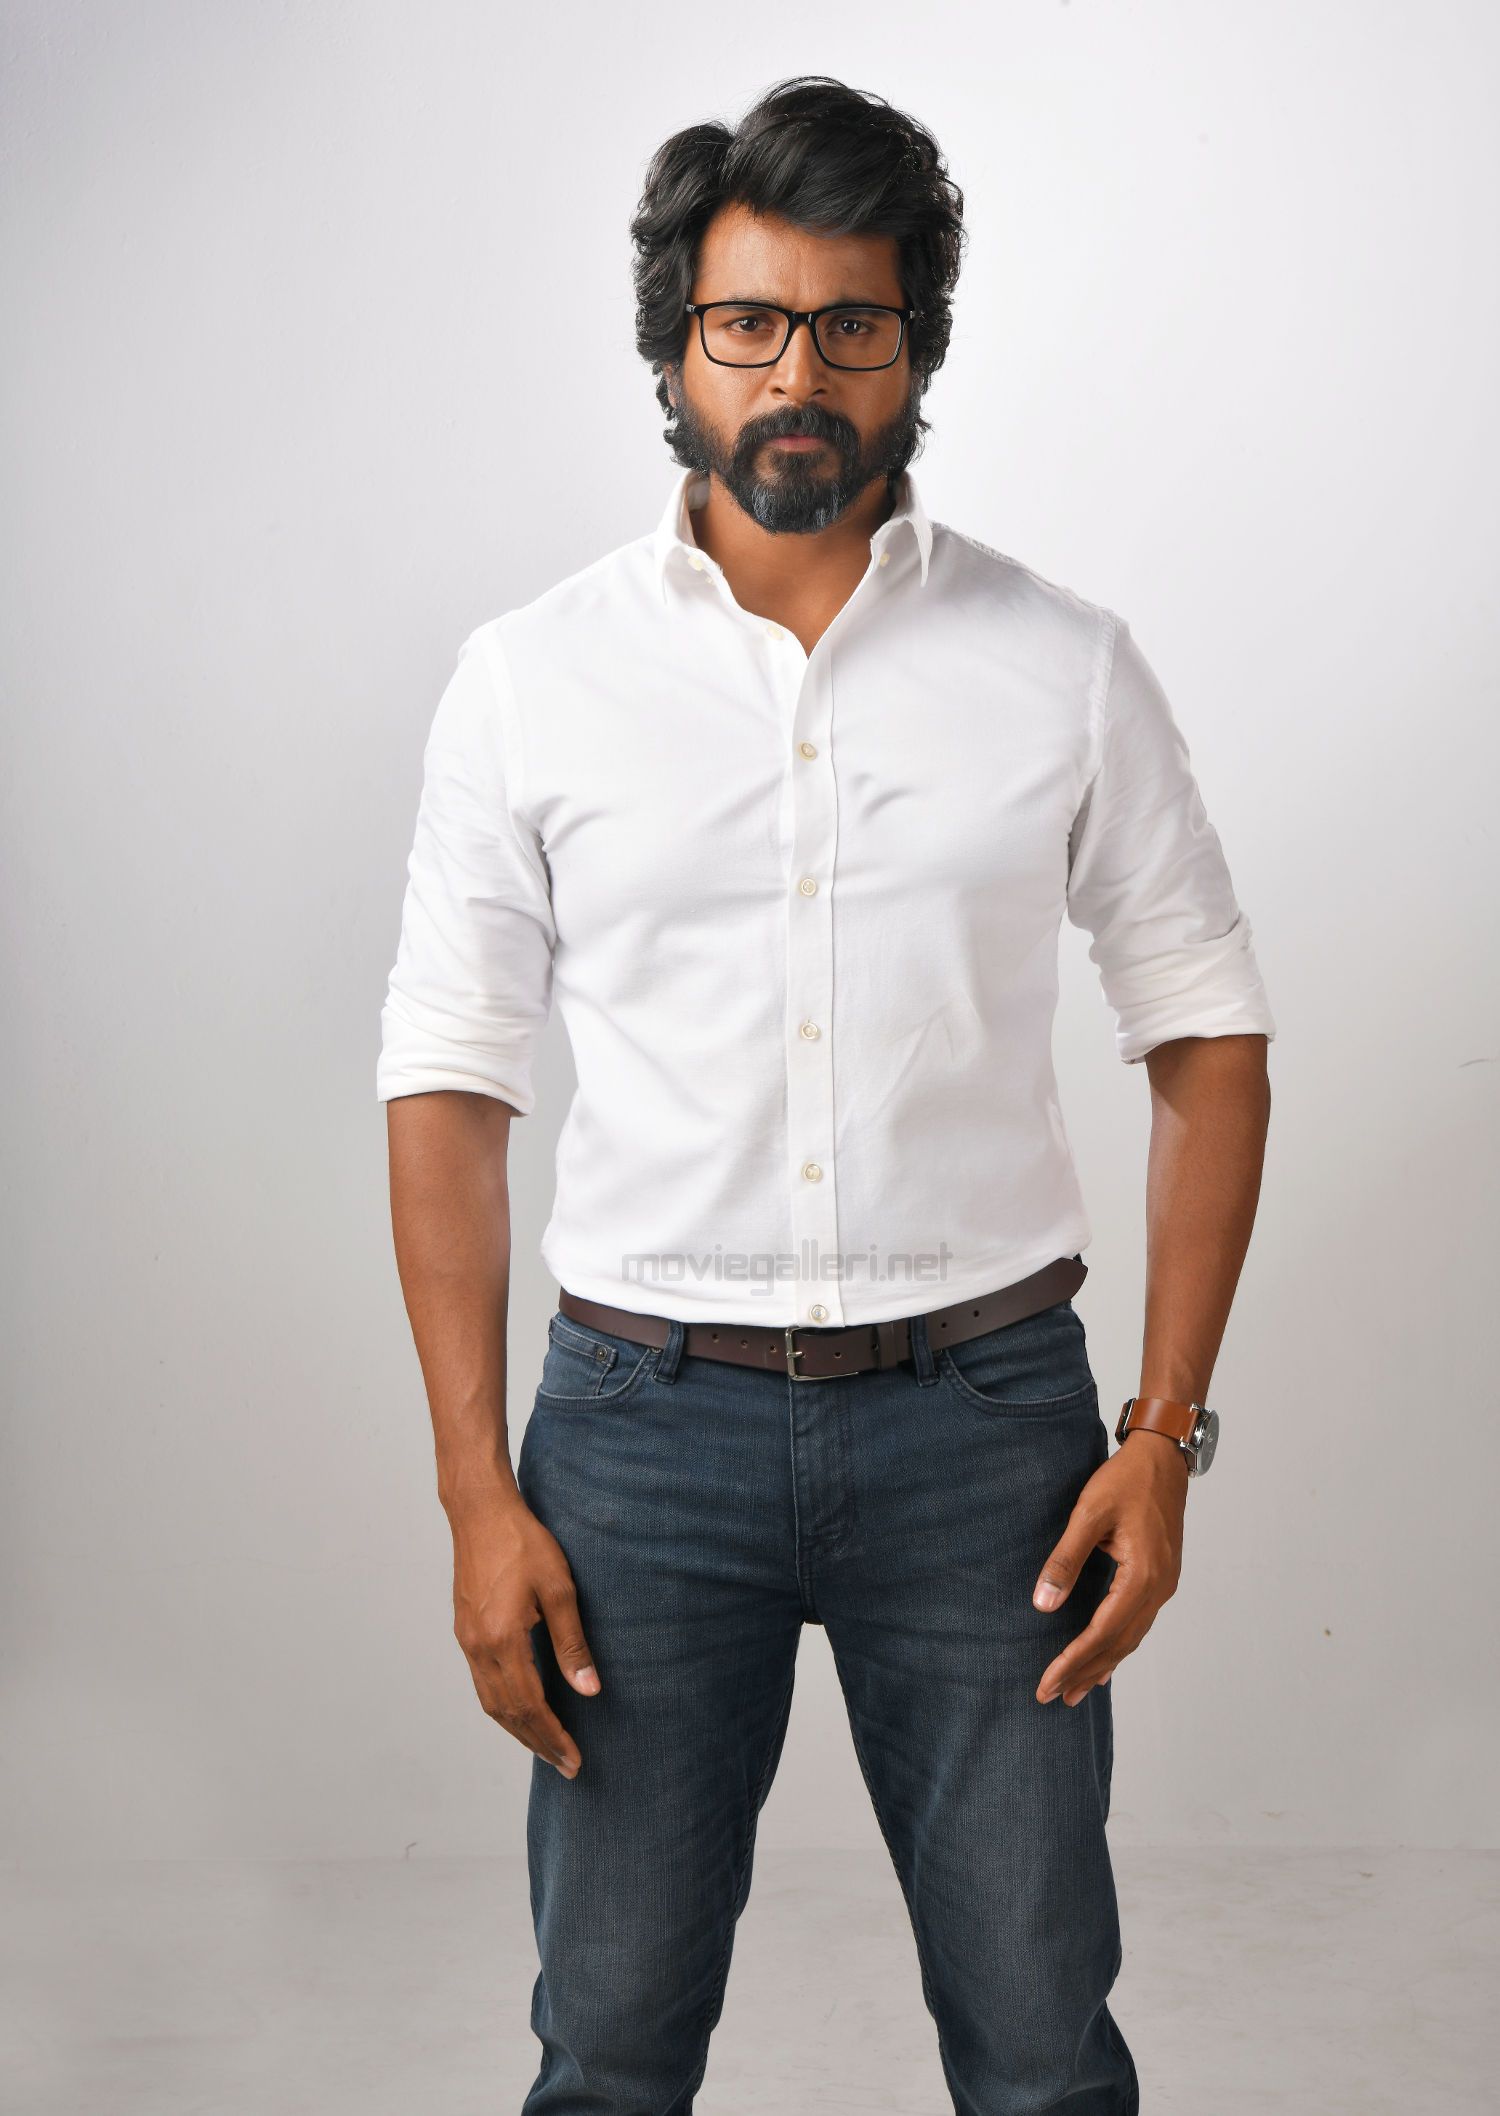 Sivakarthikeyan's screen presence will be highly acclaimed